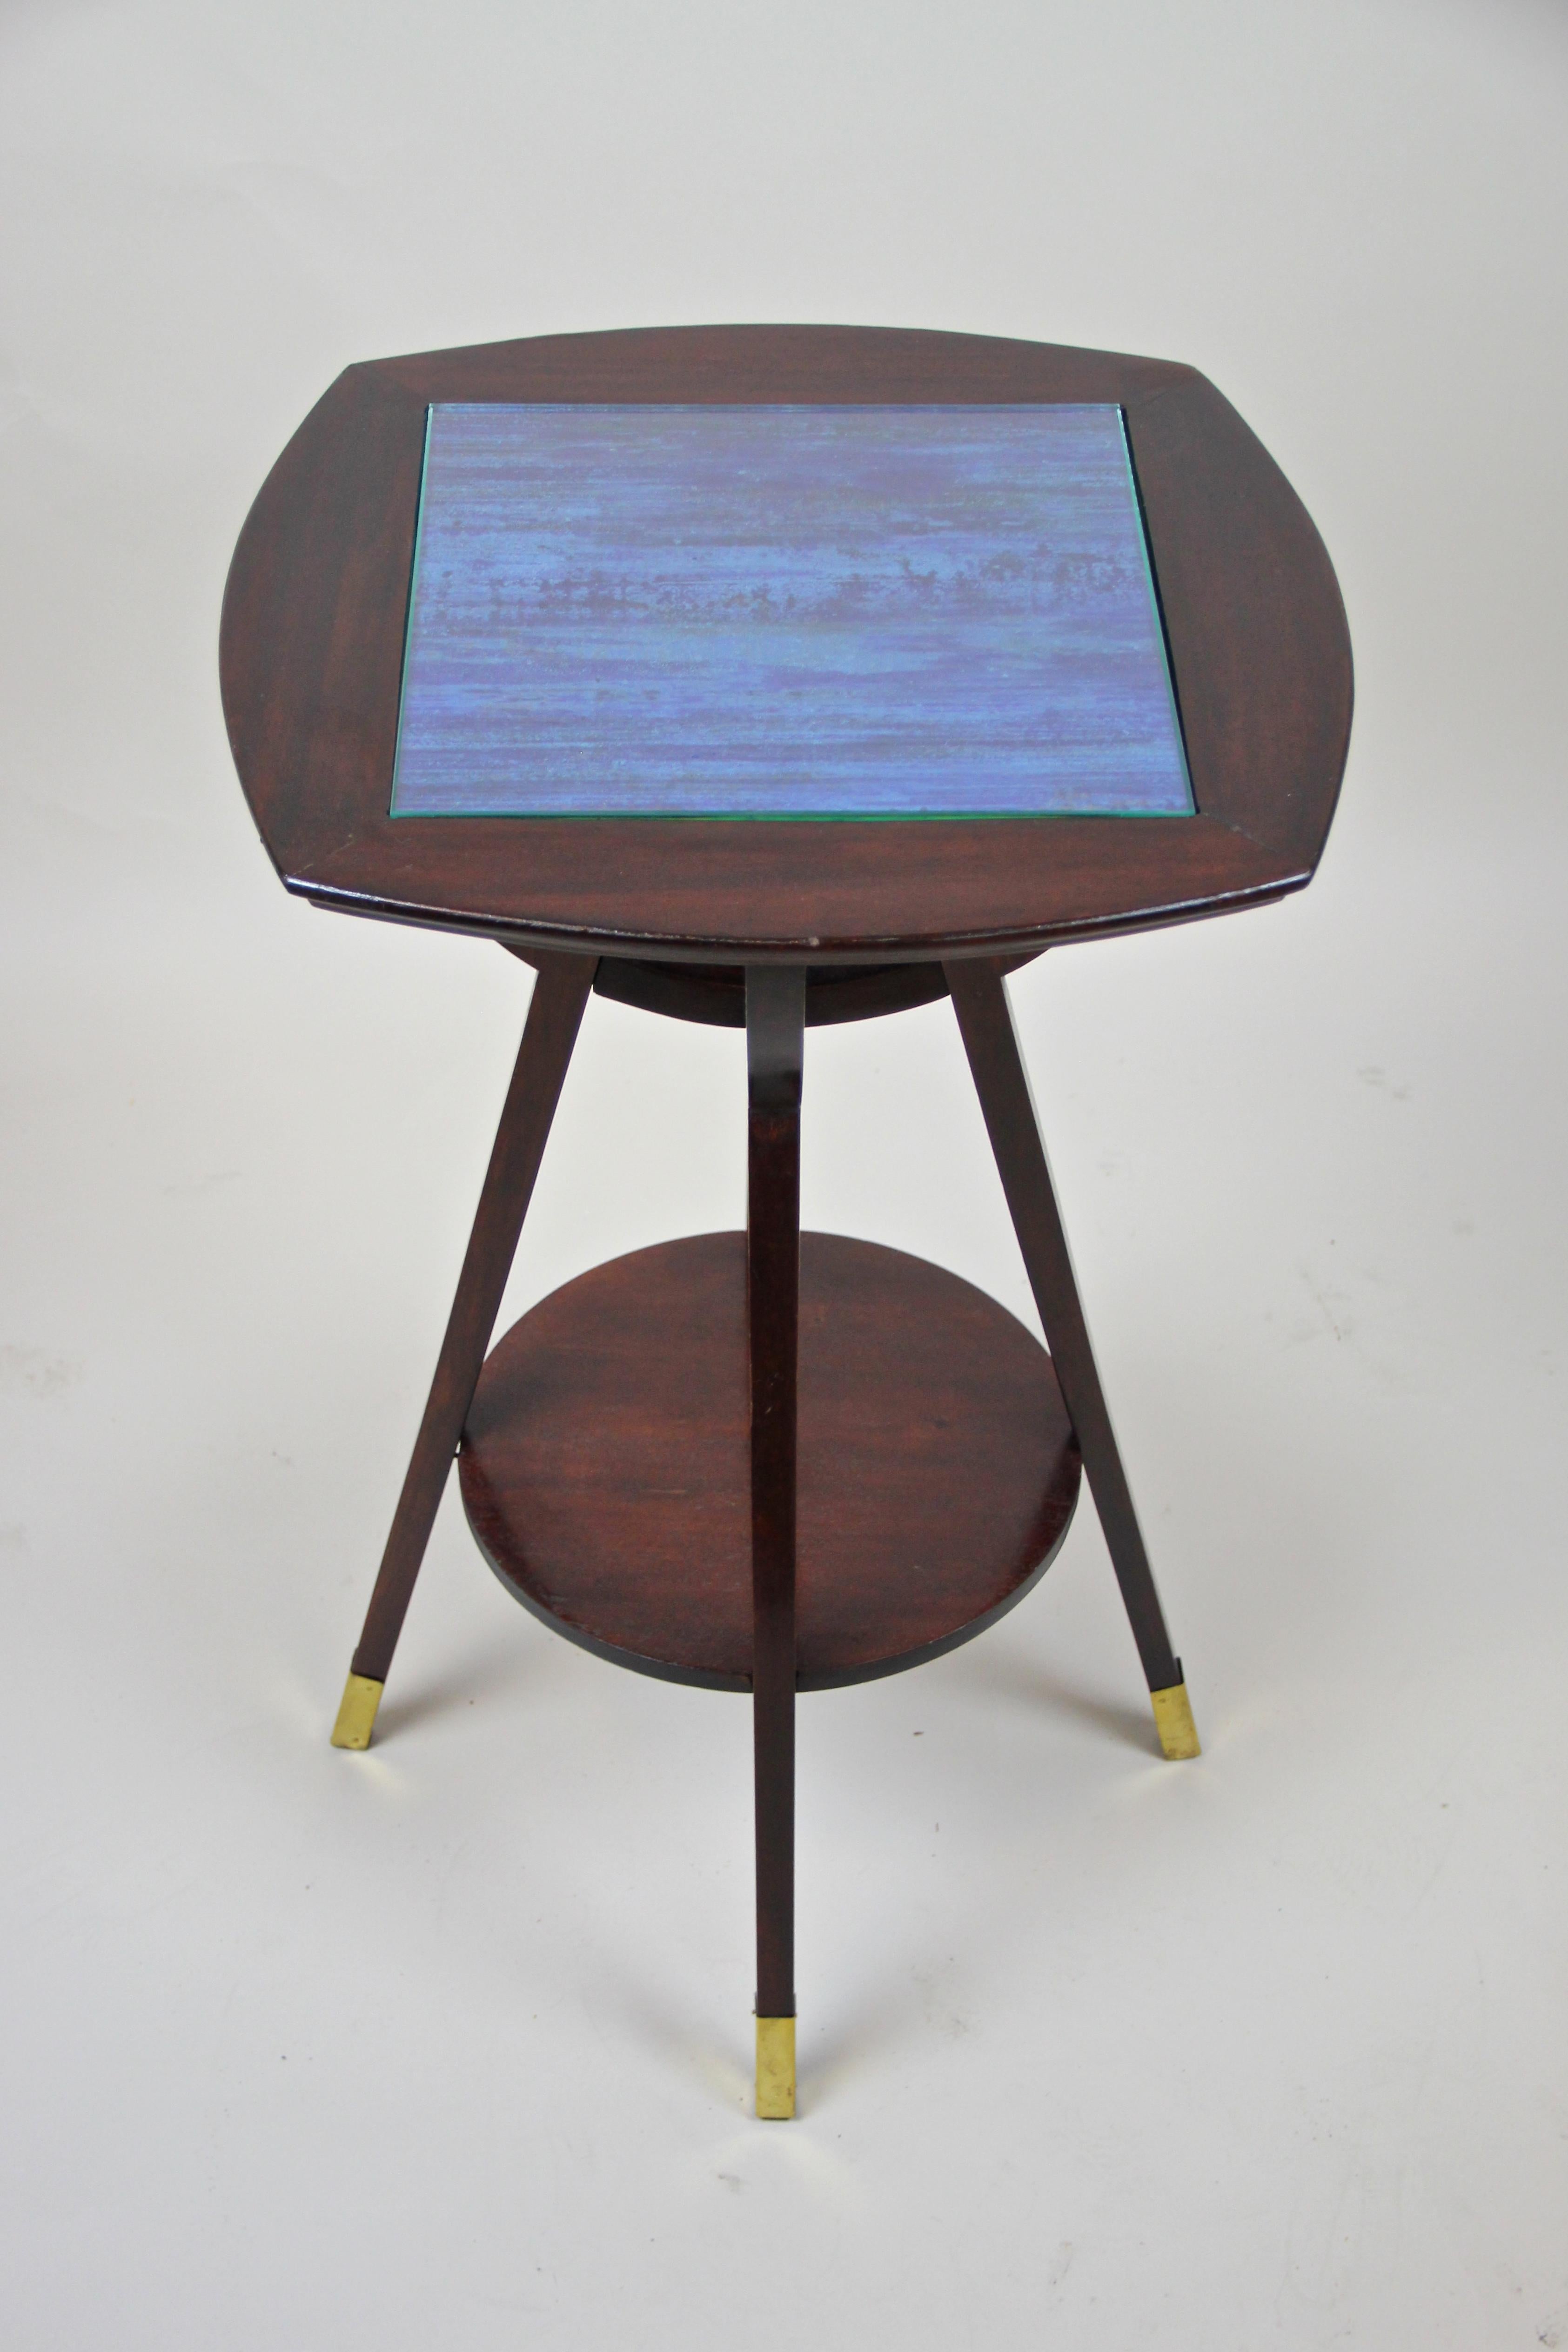 Wonderful designed Art Nouveau side table from the early 20th century, circa 1910. From the flourishing of the Art Nouveau period in Austria comes this beech wood table which was trimmed to a mahogany look. The top plate as well as the floating